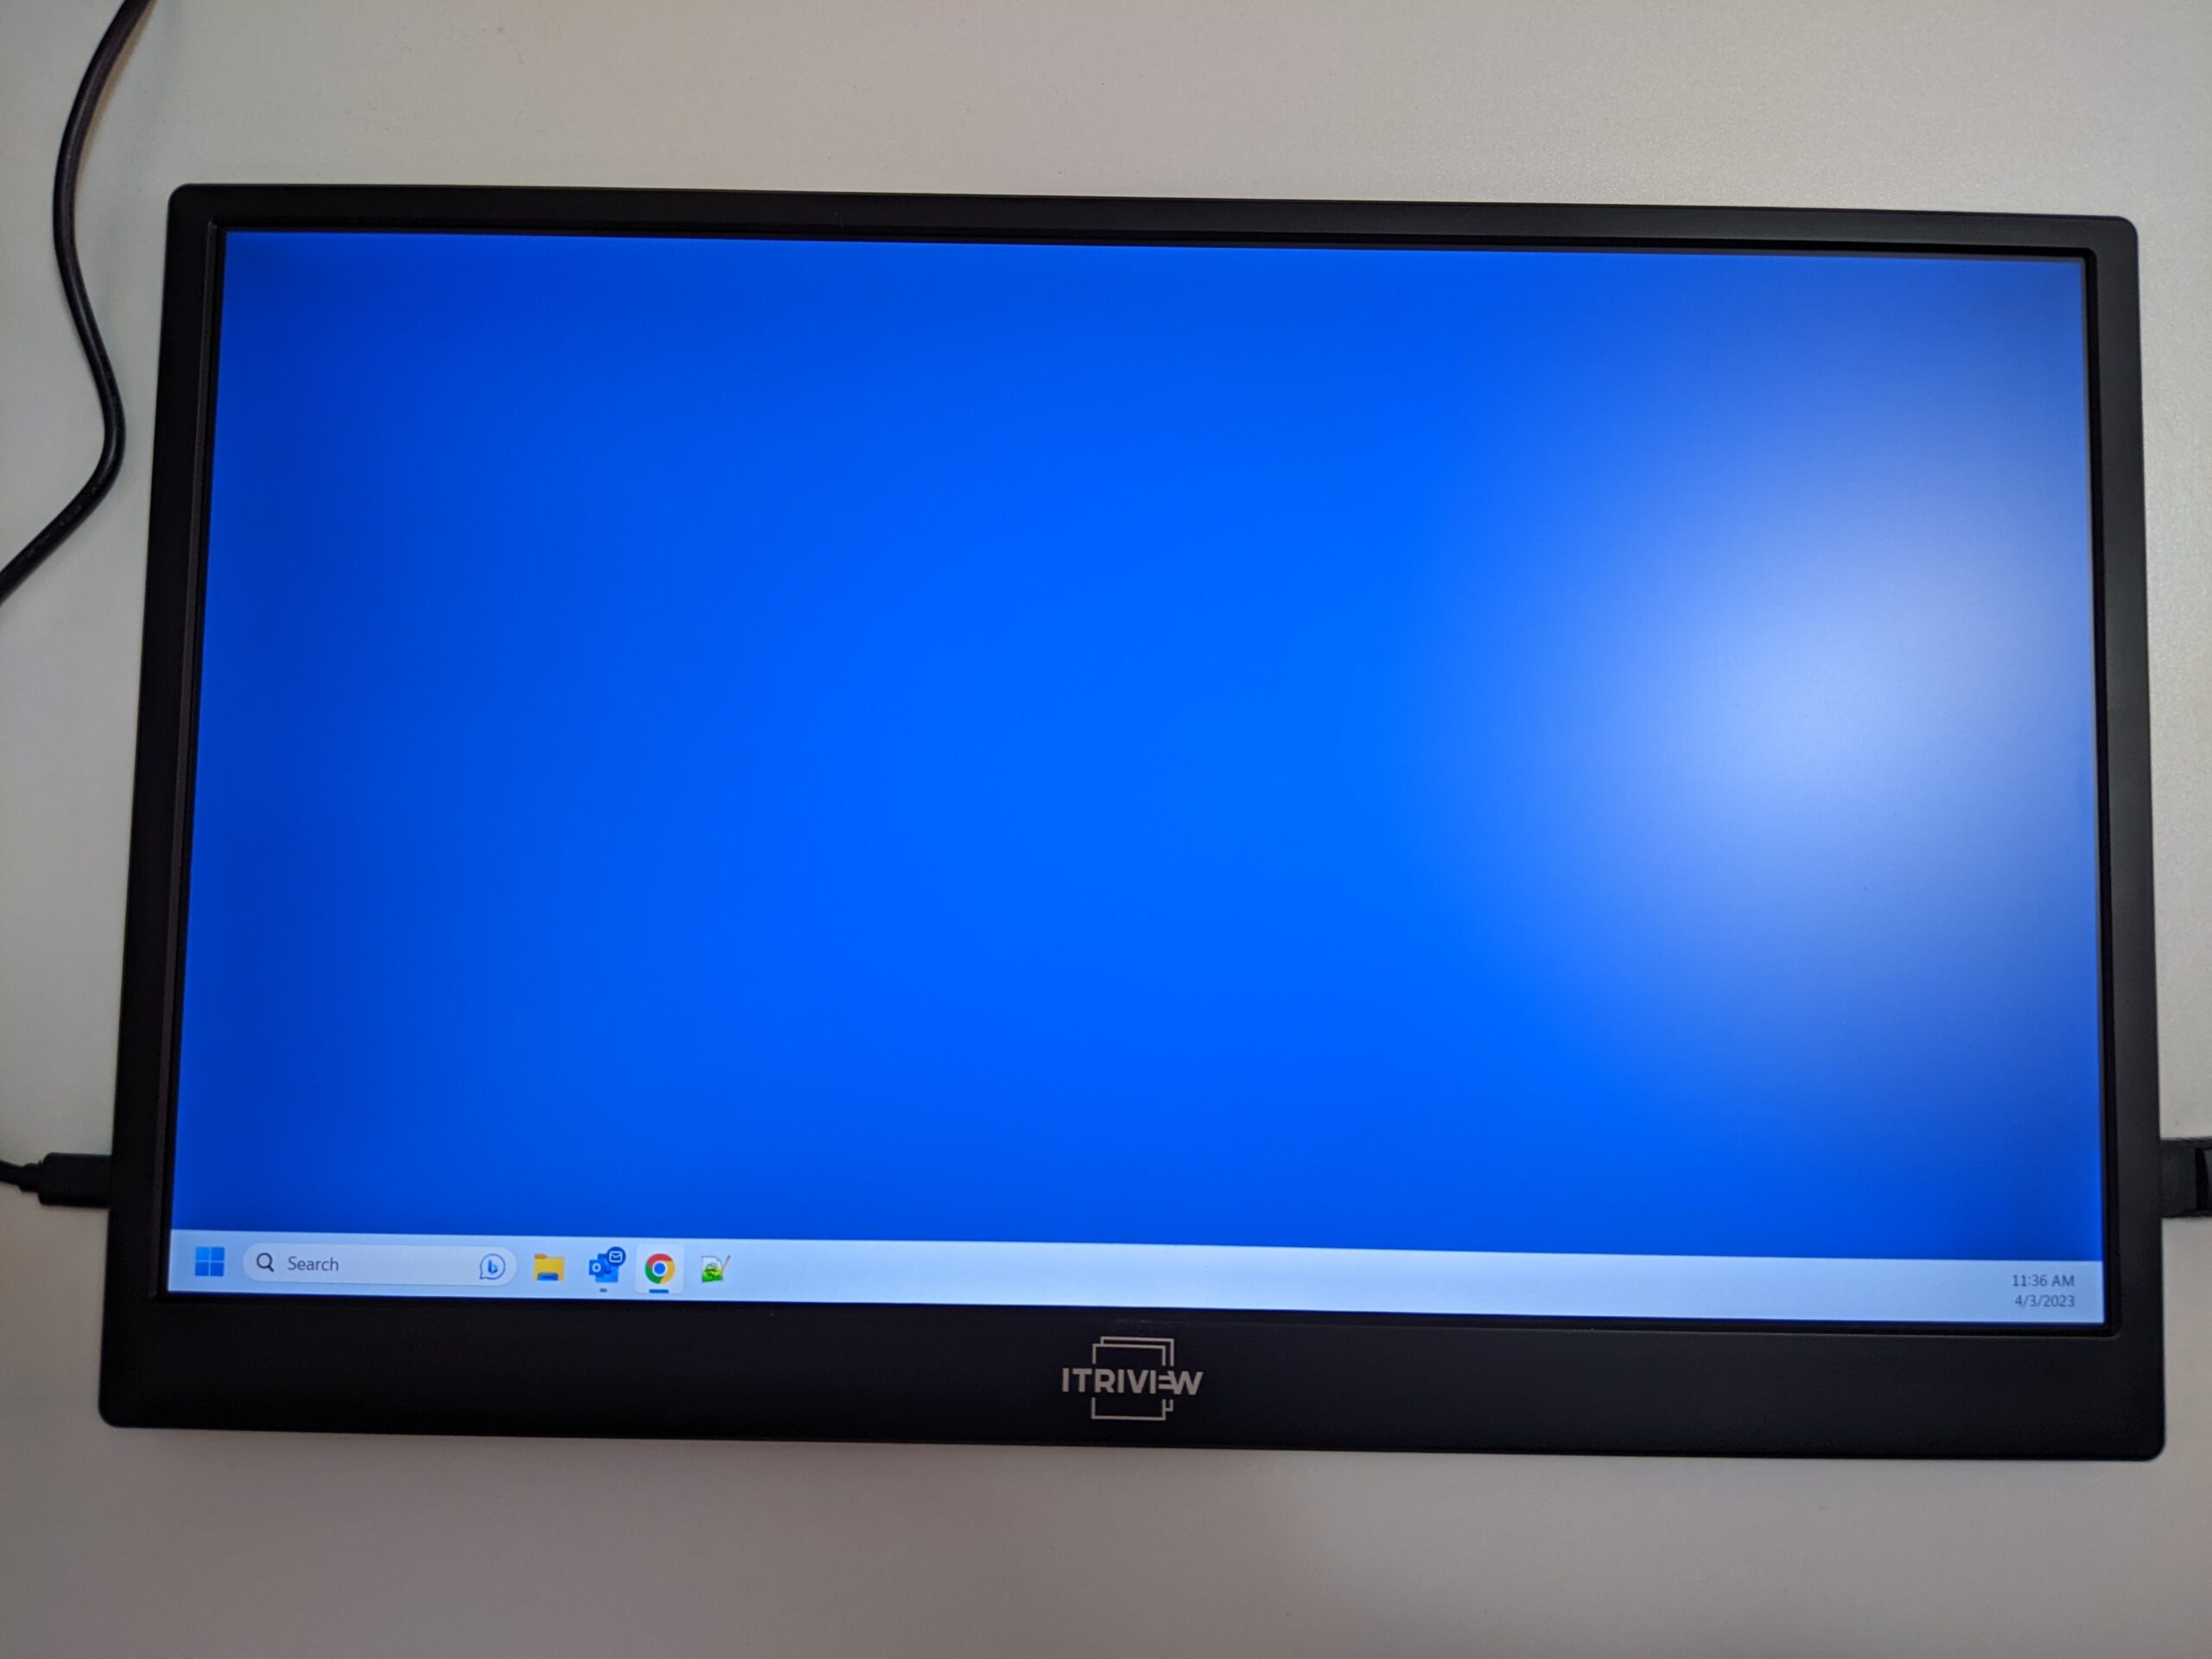 Main image of the ITRIVIEW M15 portable monitor